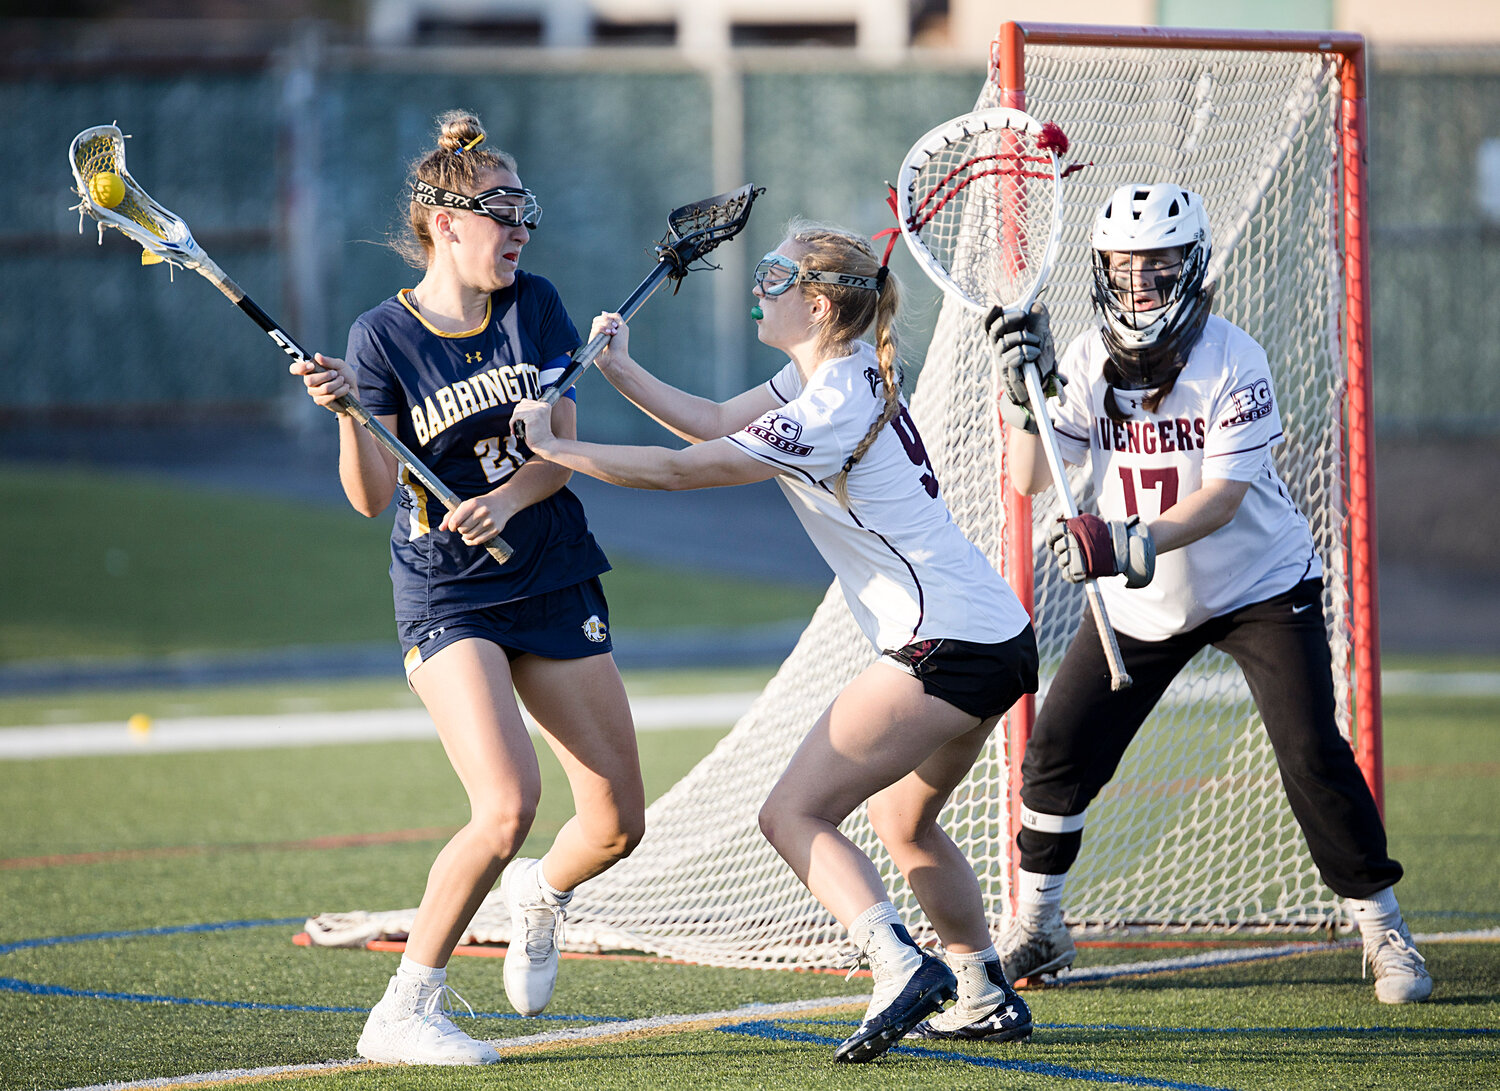 An East Greenwich defender attempts to push Violet Gagliano away from the goal.